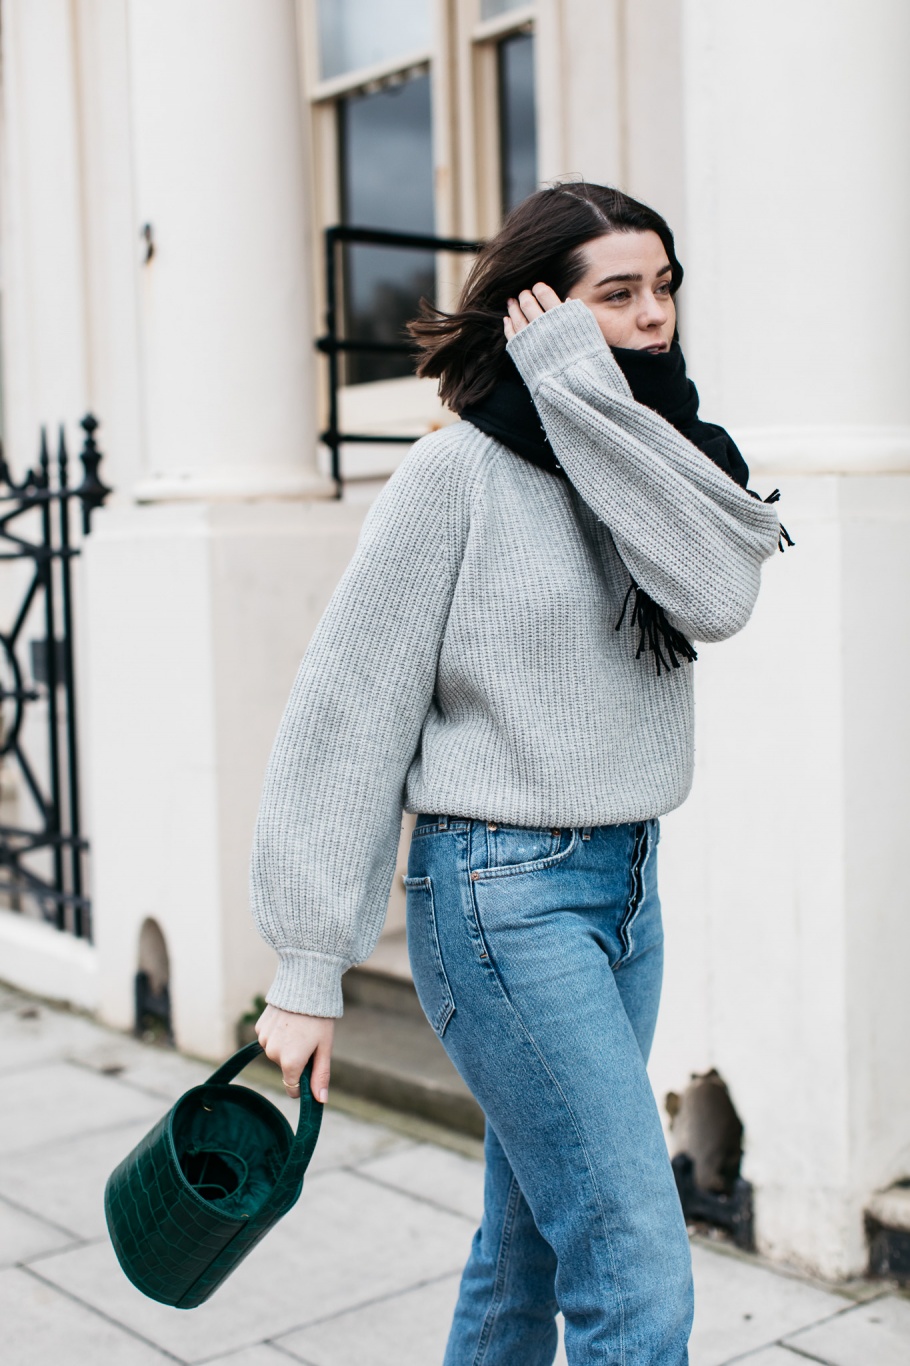 Buy The Chunkiest Knit You Can Find: Wear It All Winter – The Anna Edit